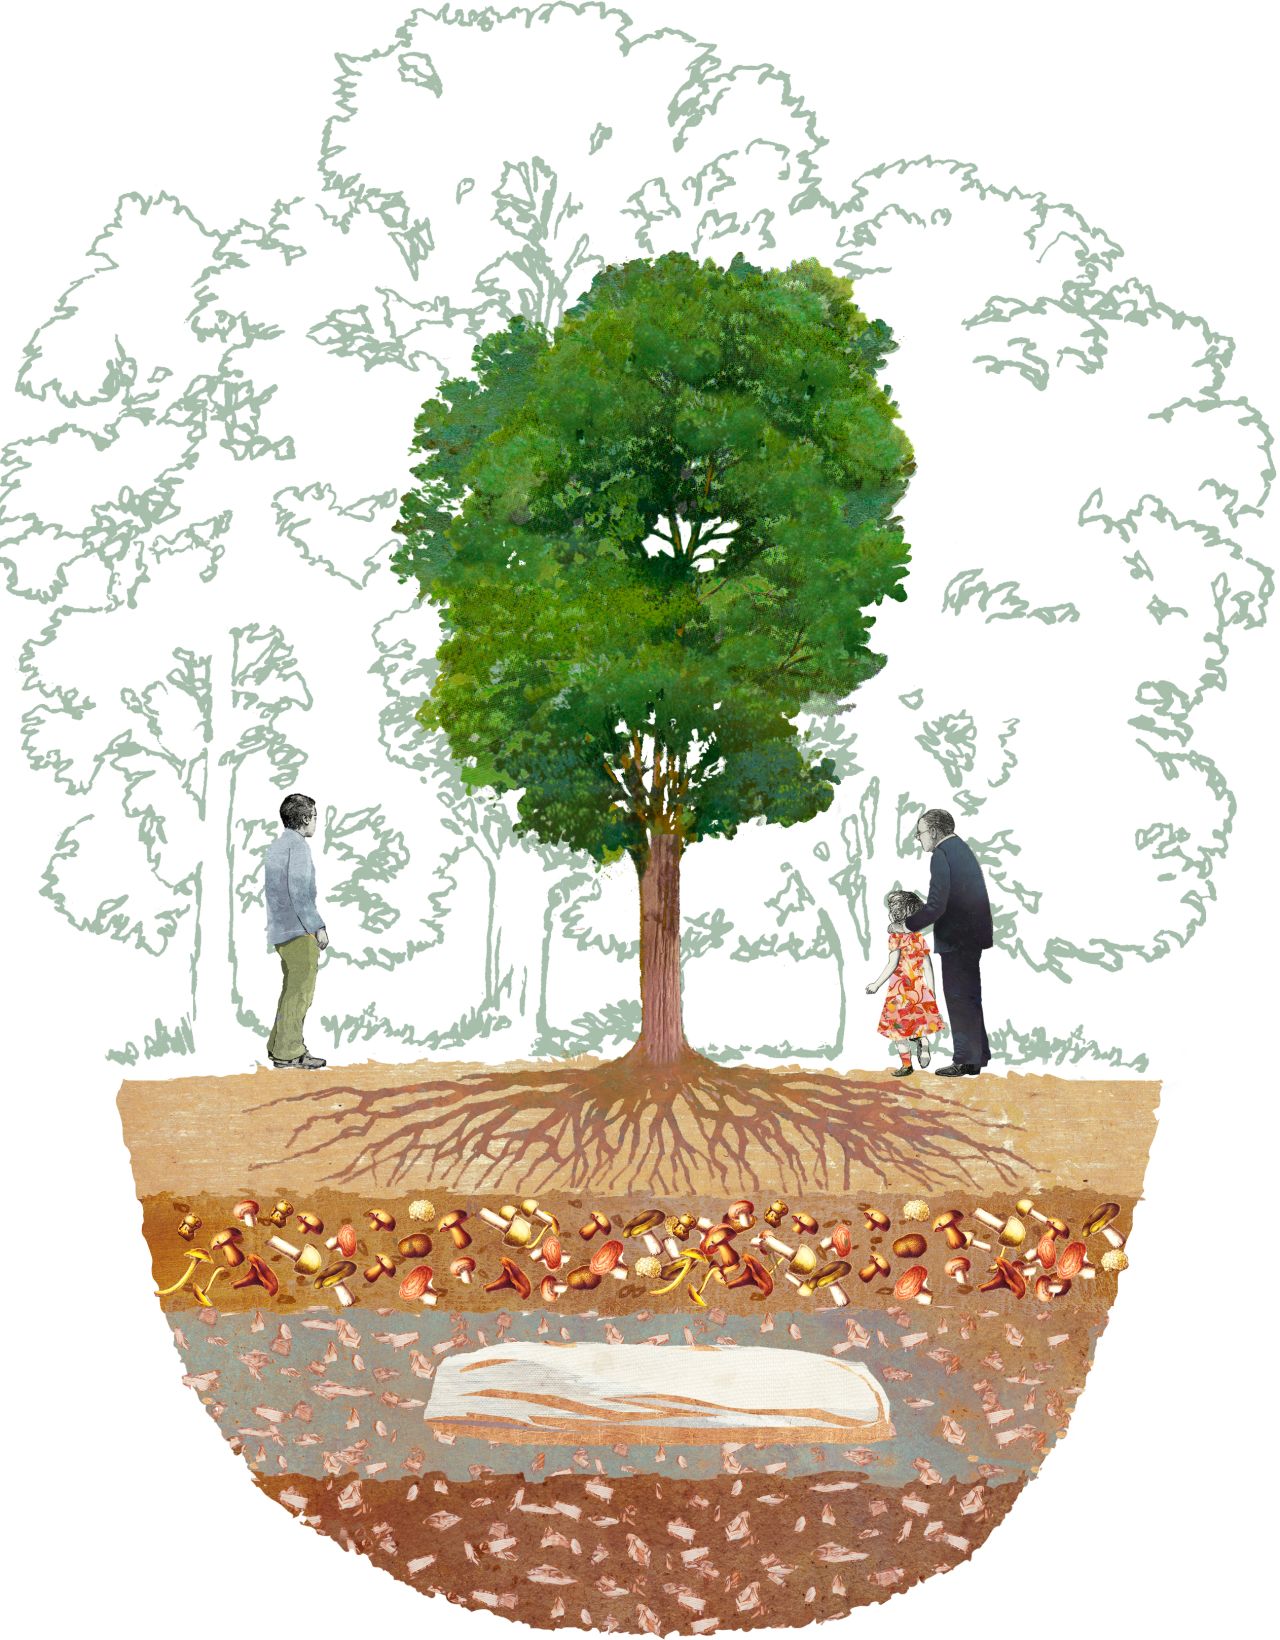 An illustration demonstrating the tree burial concept. Transcend buries the body surrounded by wood chips, local soil and a mix of fungi, designed to help compost the human remains and encourage the tree above to take up the body's nutrients. <strong><em>To learn more about the green burial movement and more sustainable funeral practices, scroll through the gallery.</em></strong>